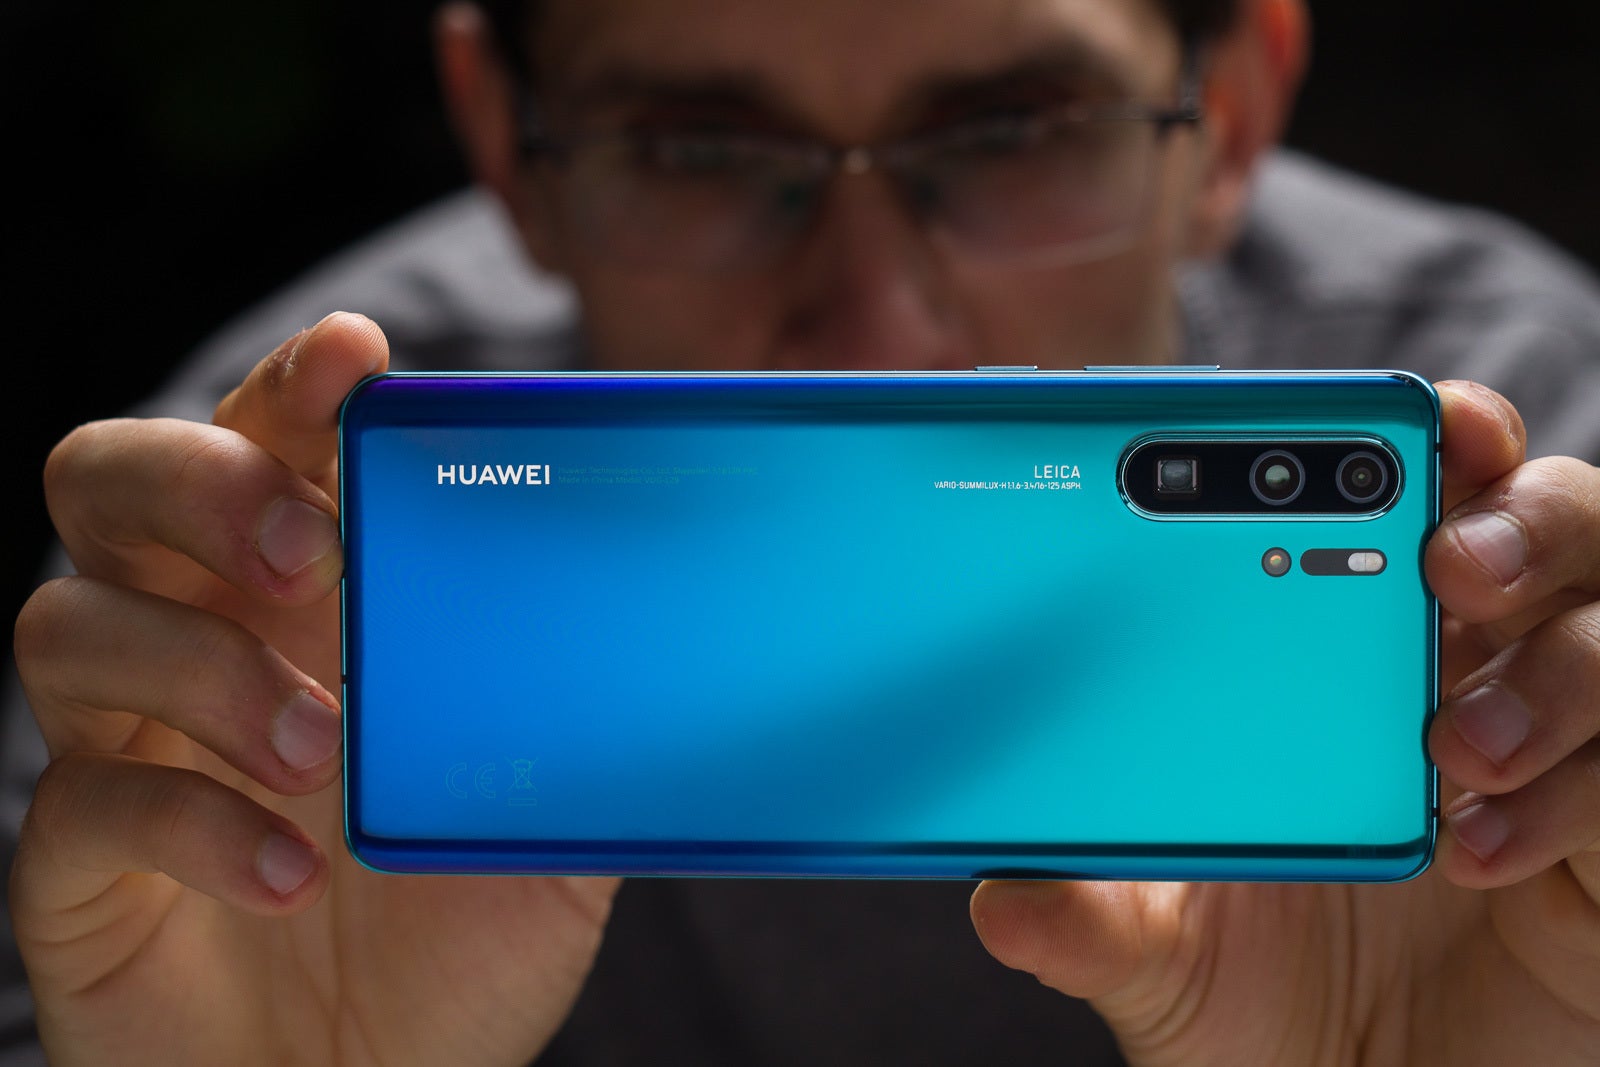 Night Mode will soon be a standard feature among flagships - The Galaxy Note 10 & iPhone 11 are proof Huawei's an industry leader